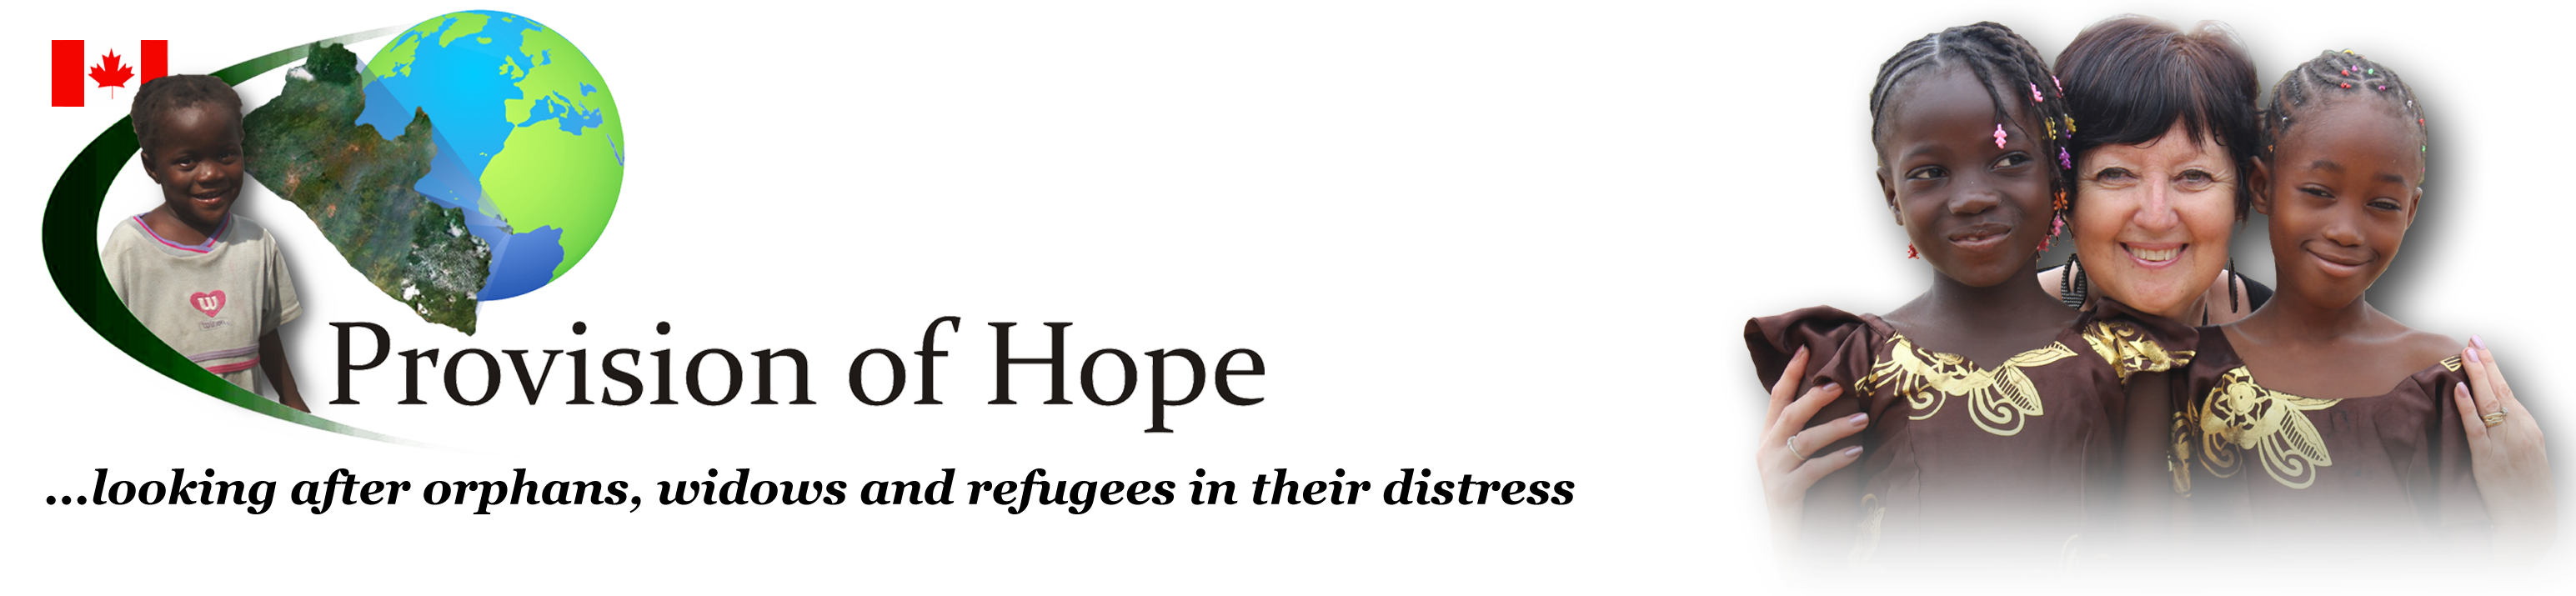 Provision of Hope